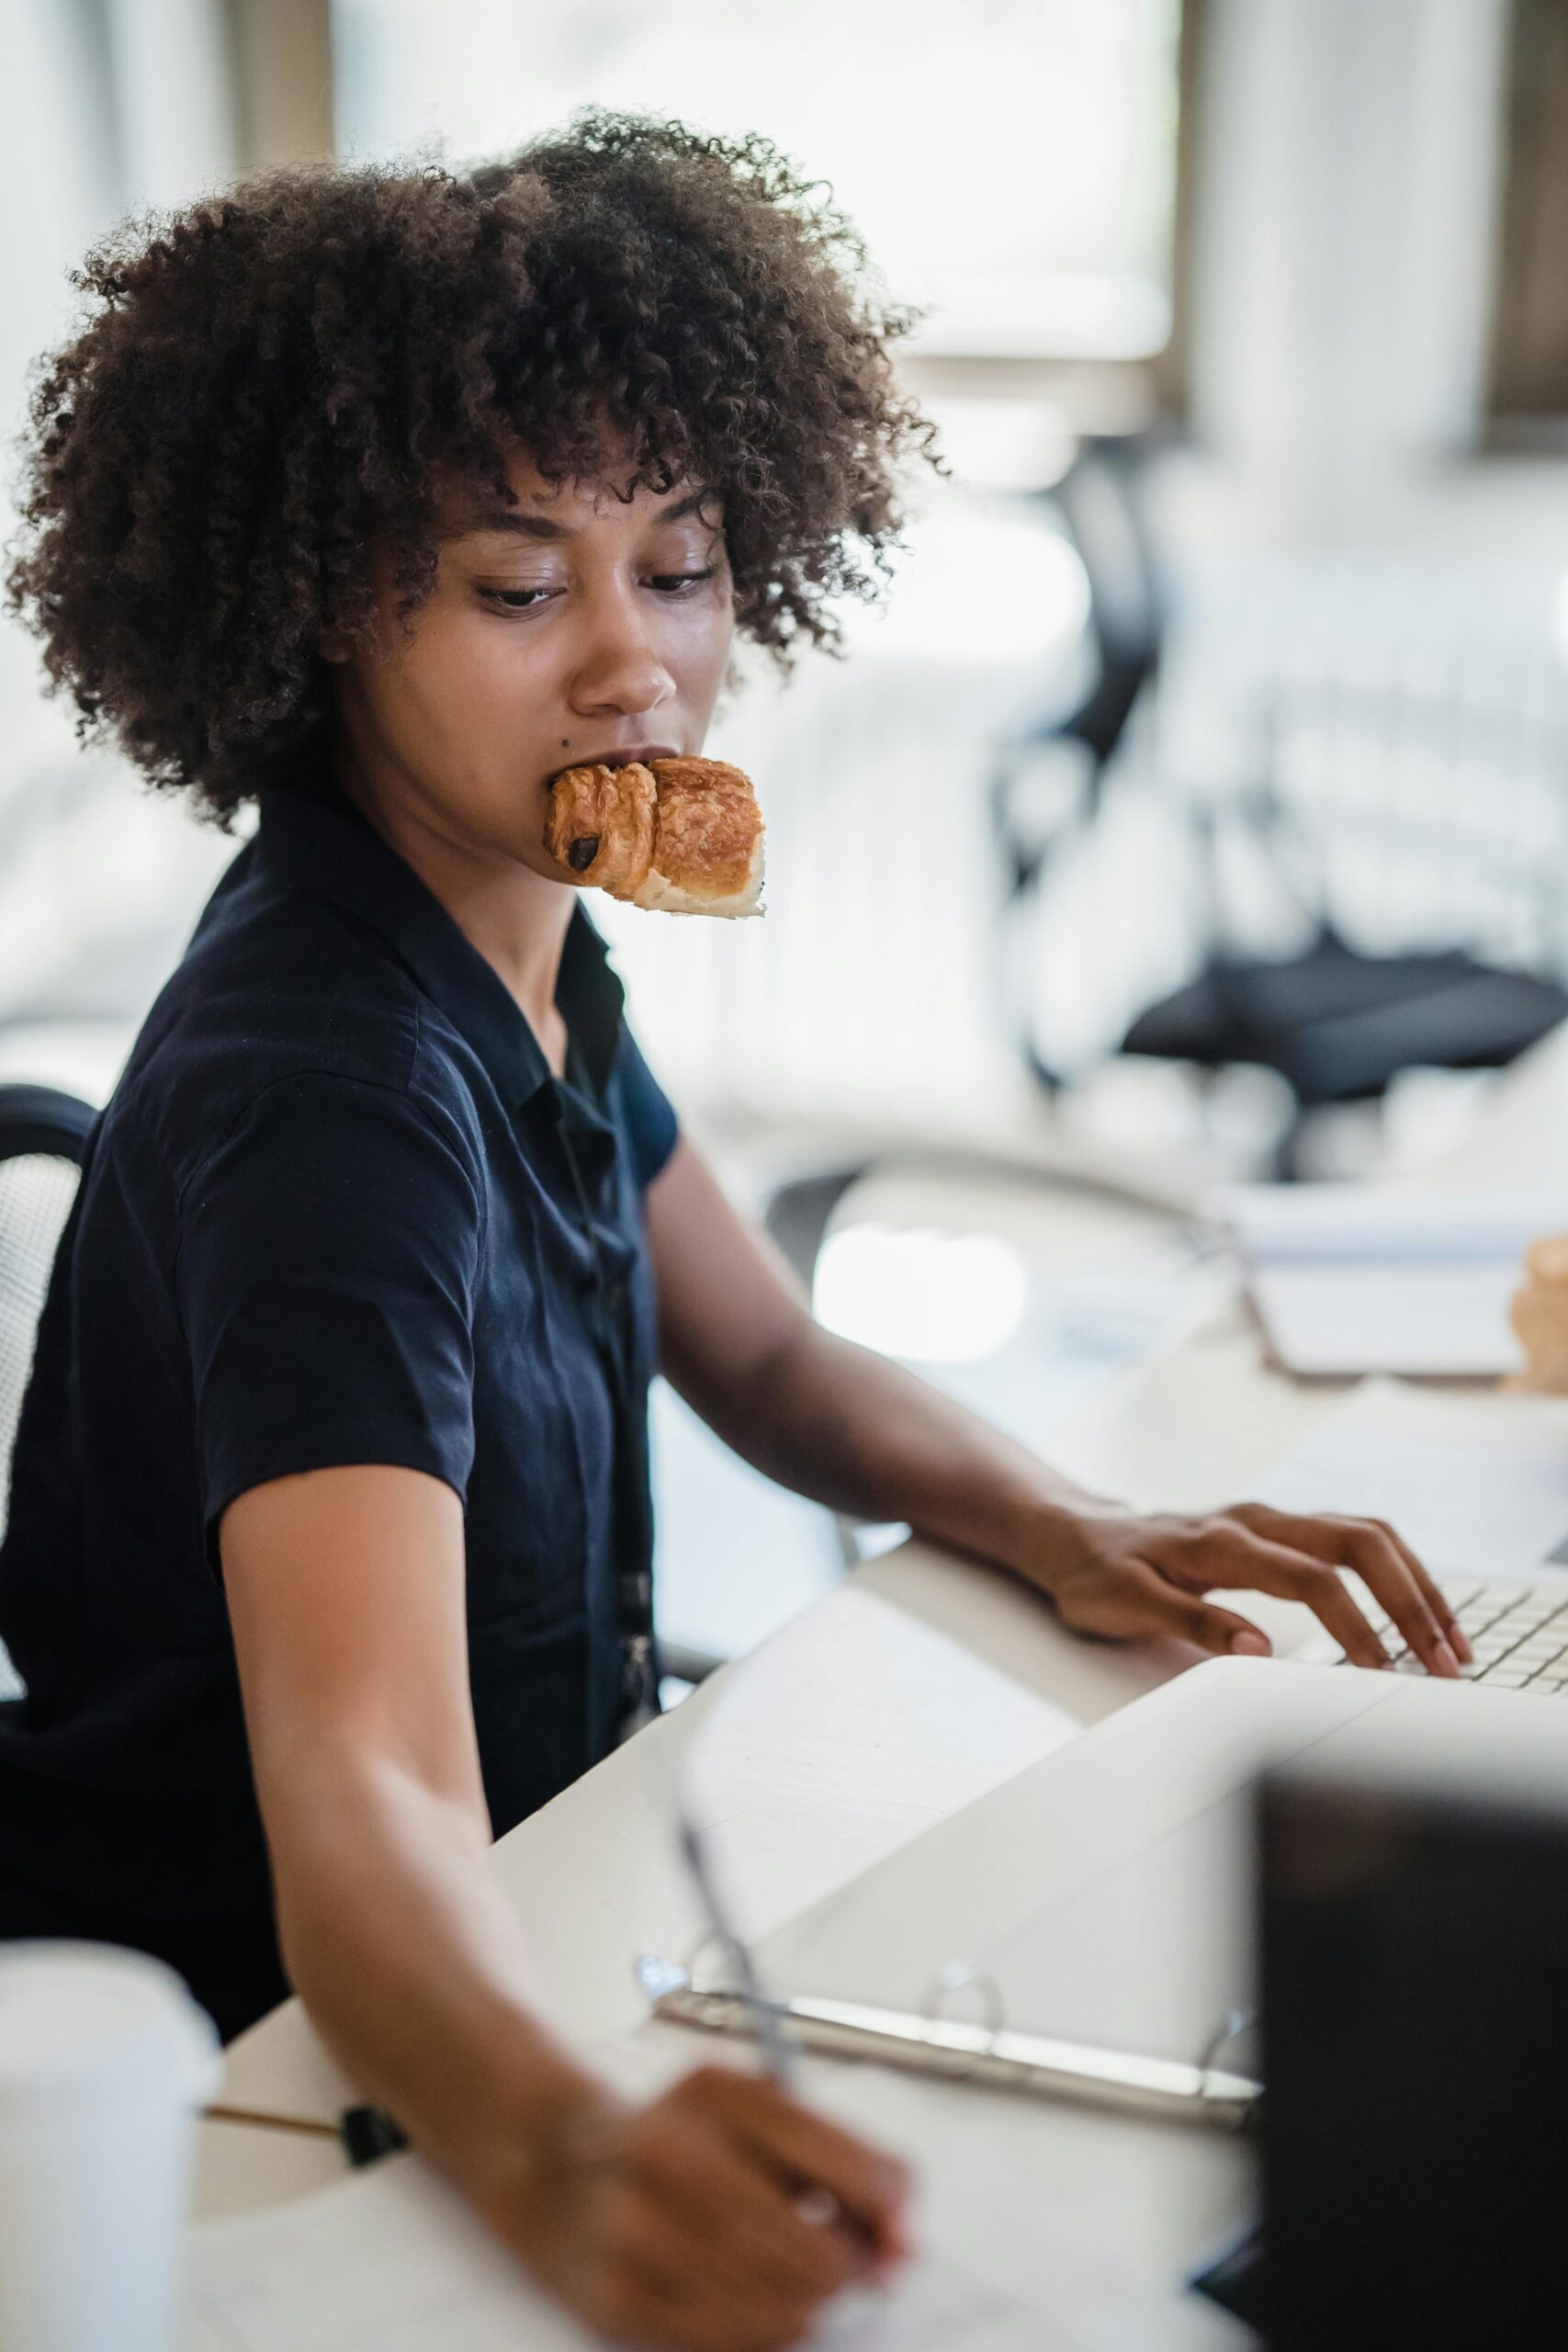 lady eating while working